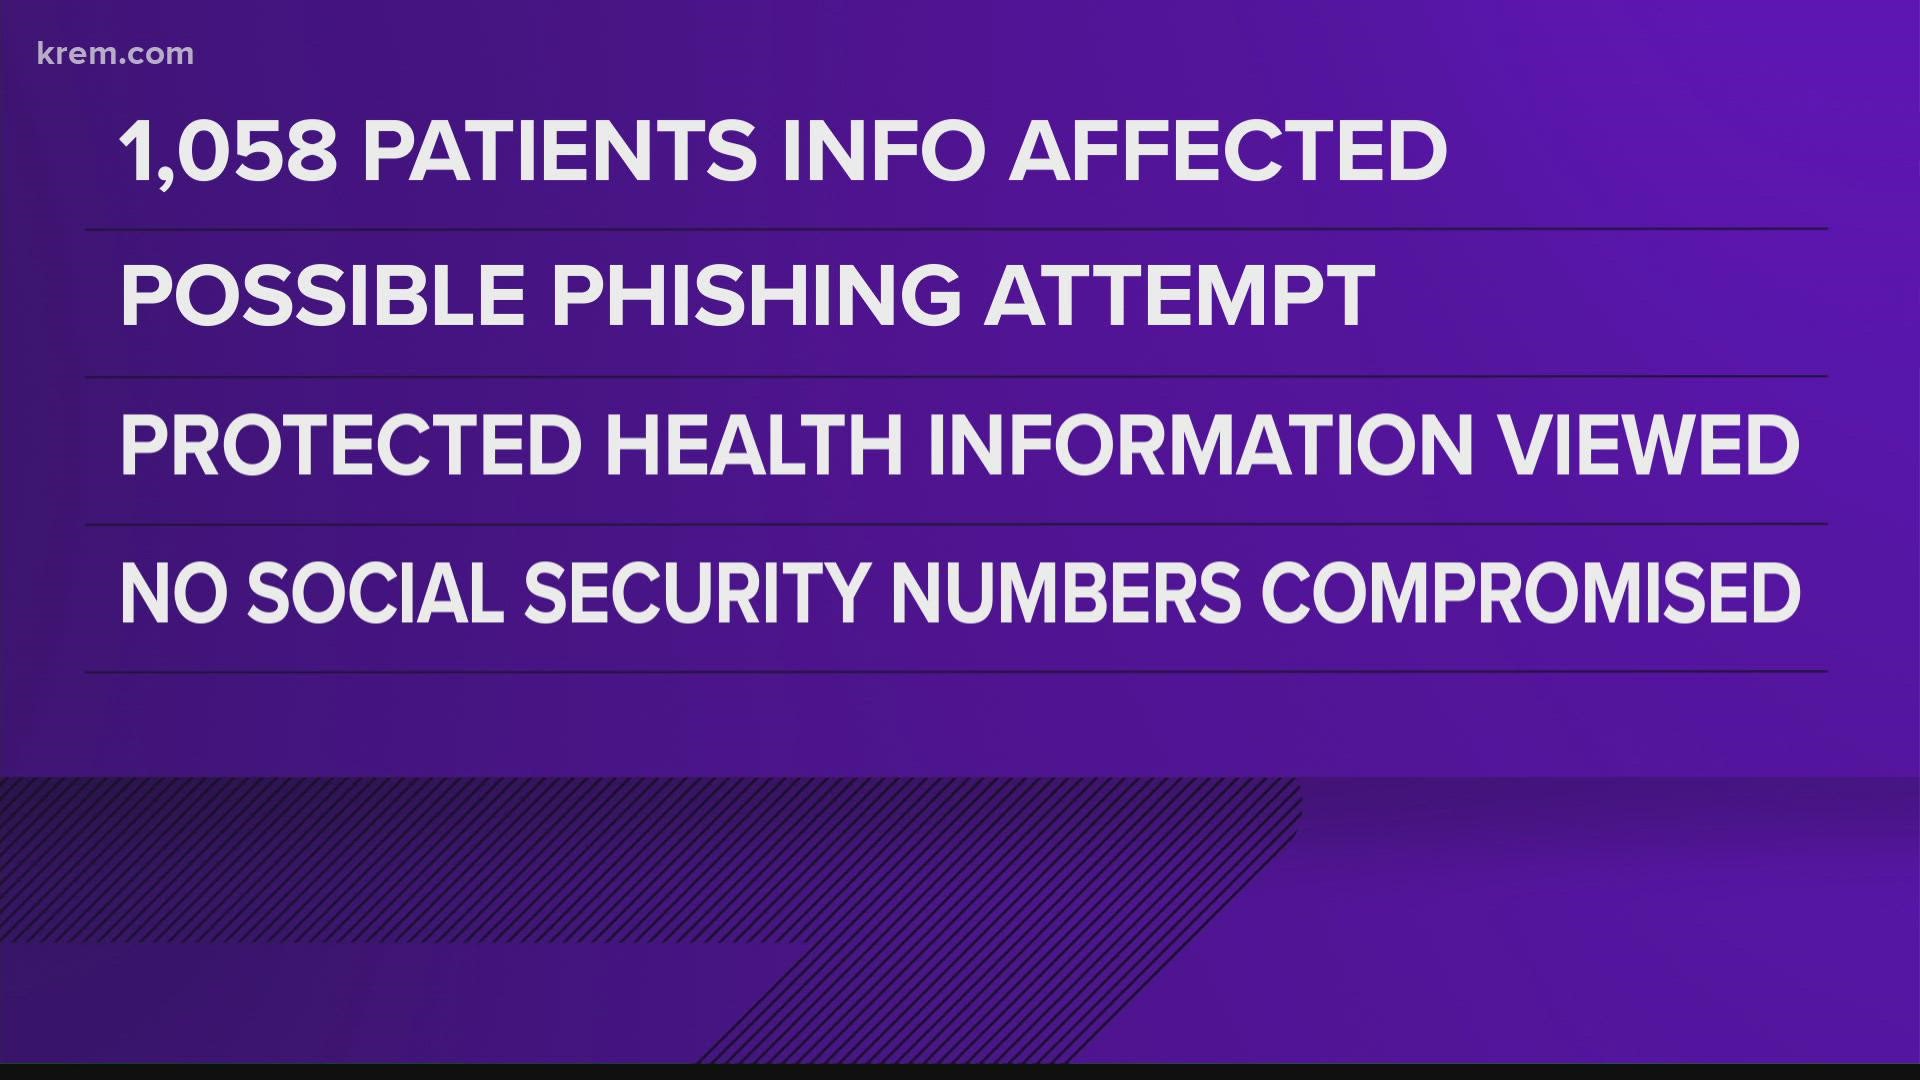 SRHD IT staff were alerted of an unauthorized breach of personal health information via a phishing email on Dec. 21, 2021.